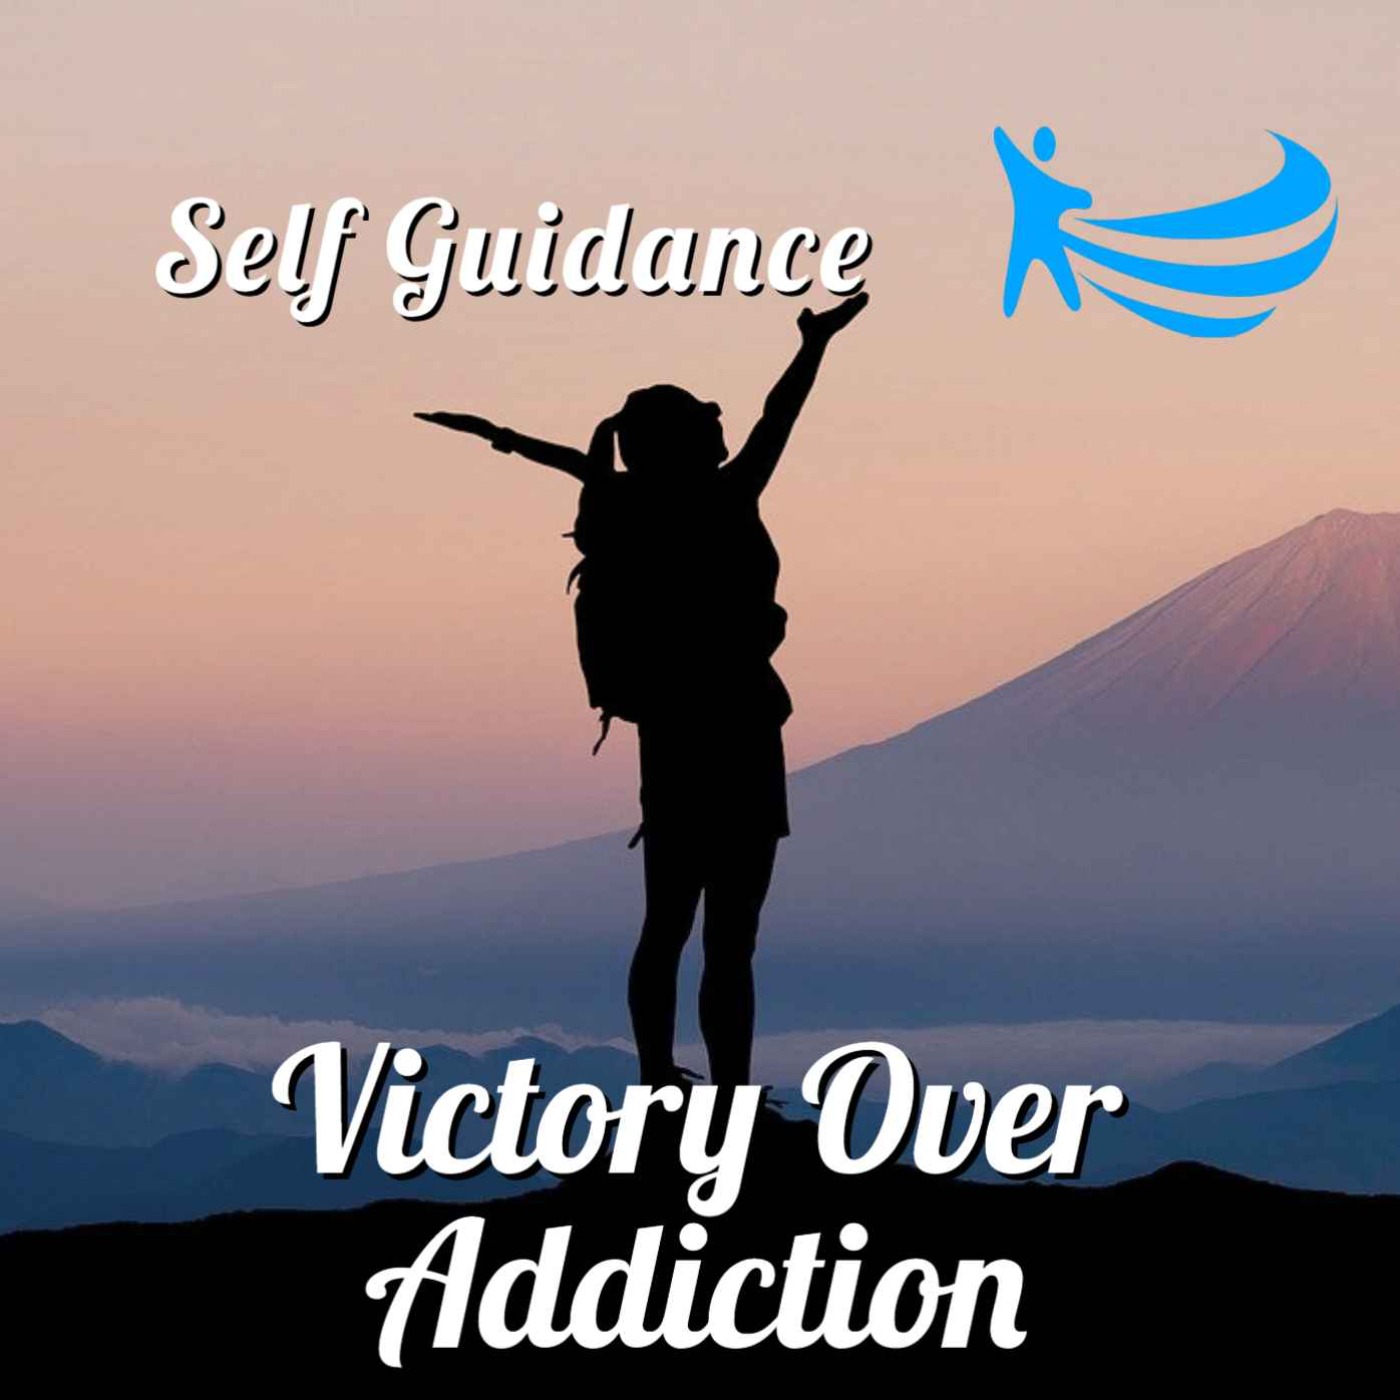 Self Guidance: Victory Over Addiction